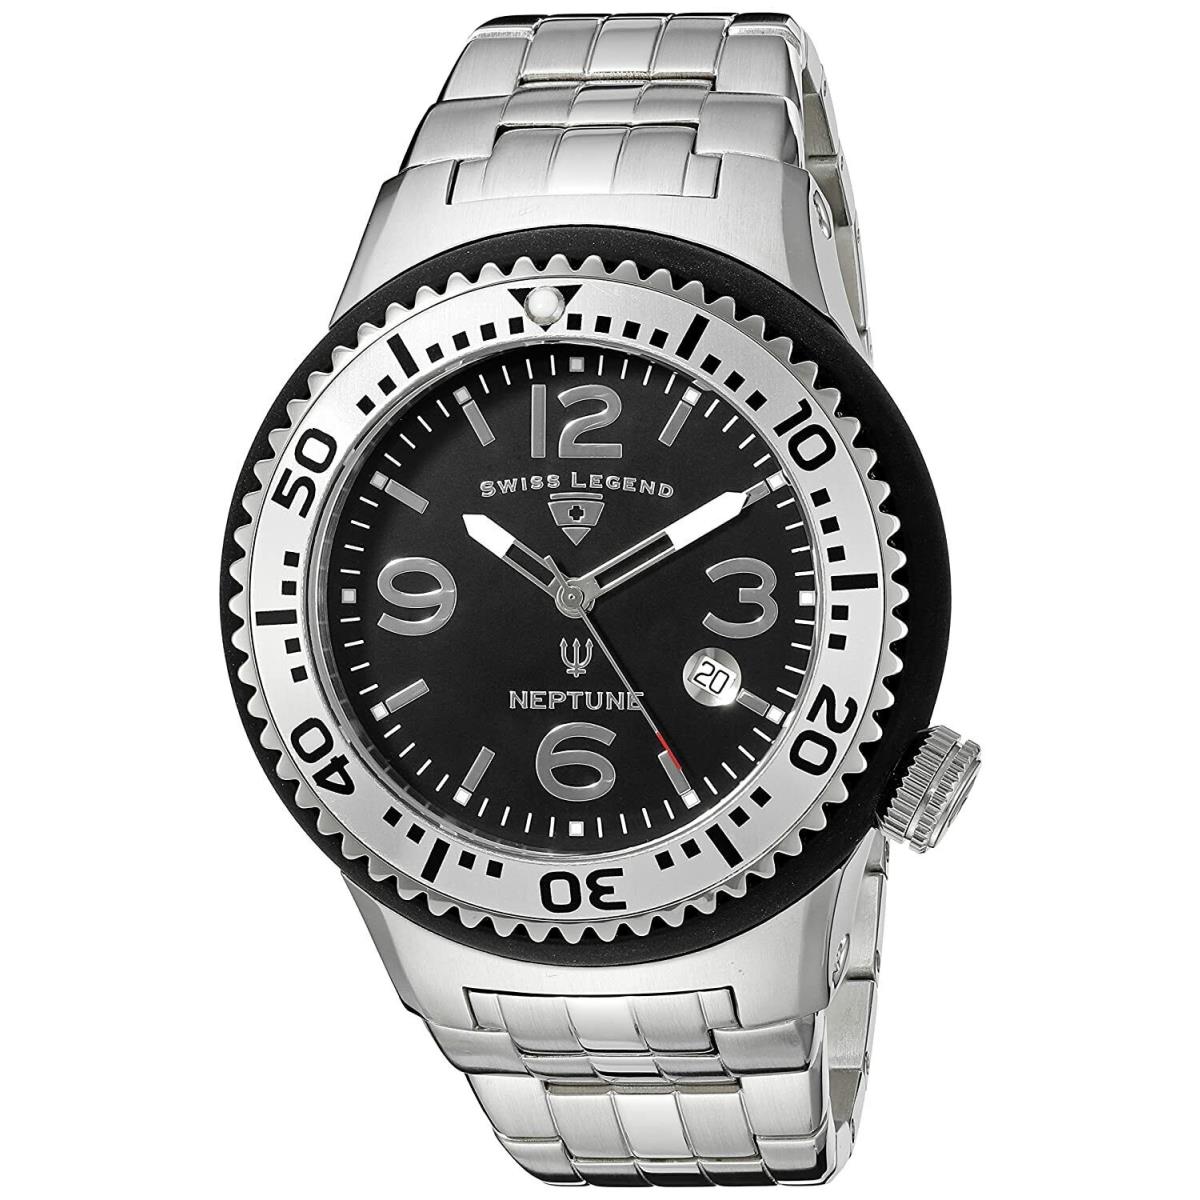 Swiss Legend 21819P-11-SB Neptune Force Stainless Steel Black Dial Men`s Watch - Dial: Black, Band: Silver